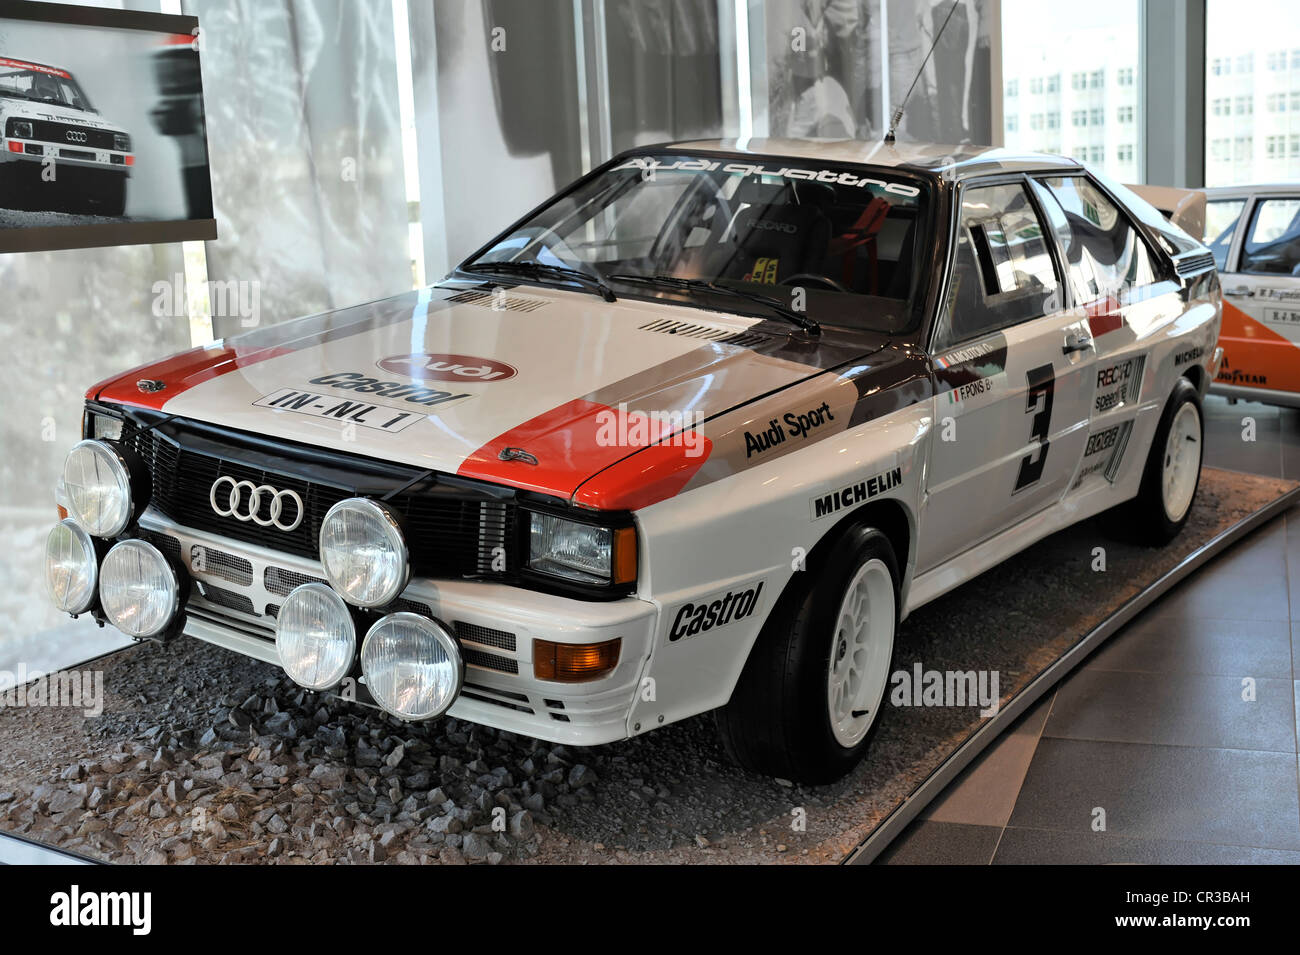 Audi Rally Quattro A2, built in 1983, museum mobile, Erlebniswelt Audi, Audi, Ingolstadt, Bavaria, Germany, Europe Stock Photo